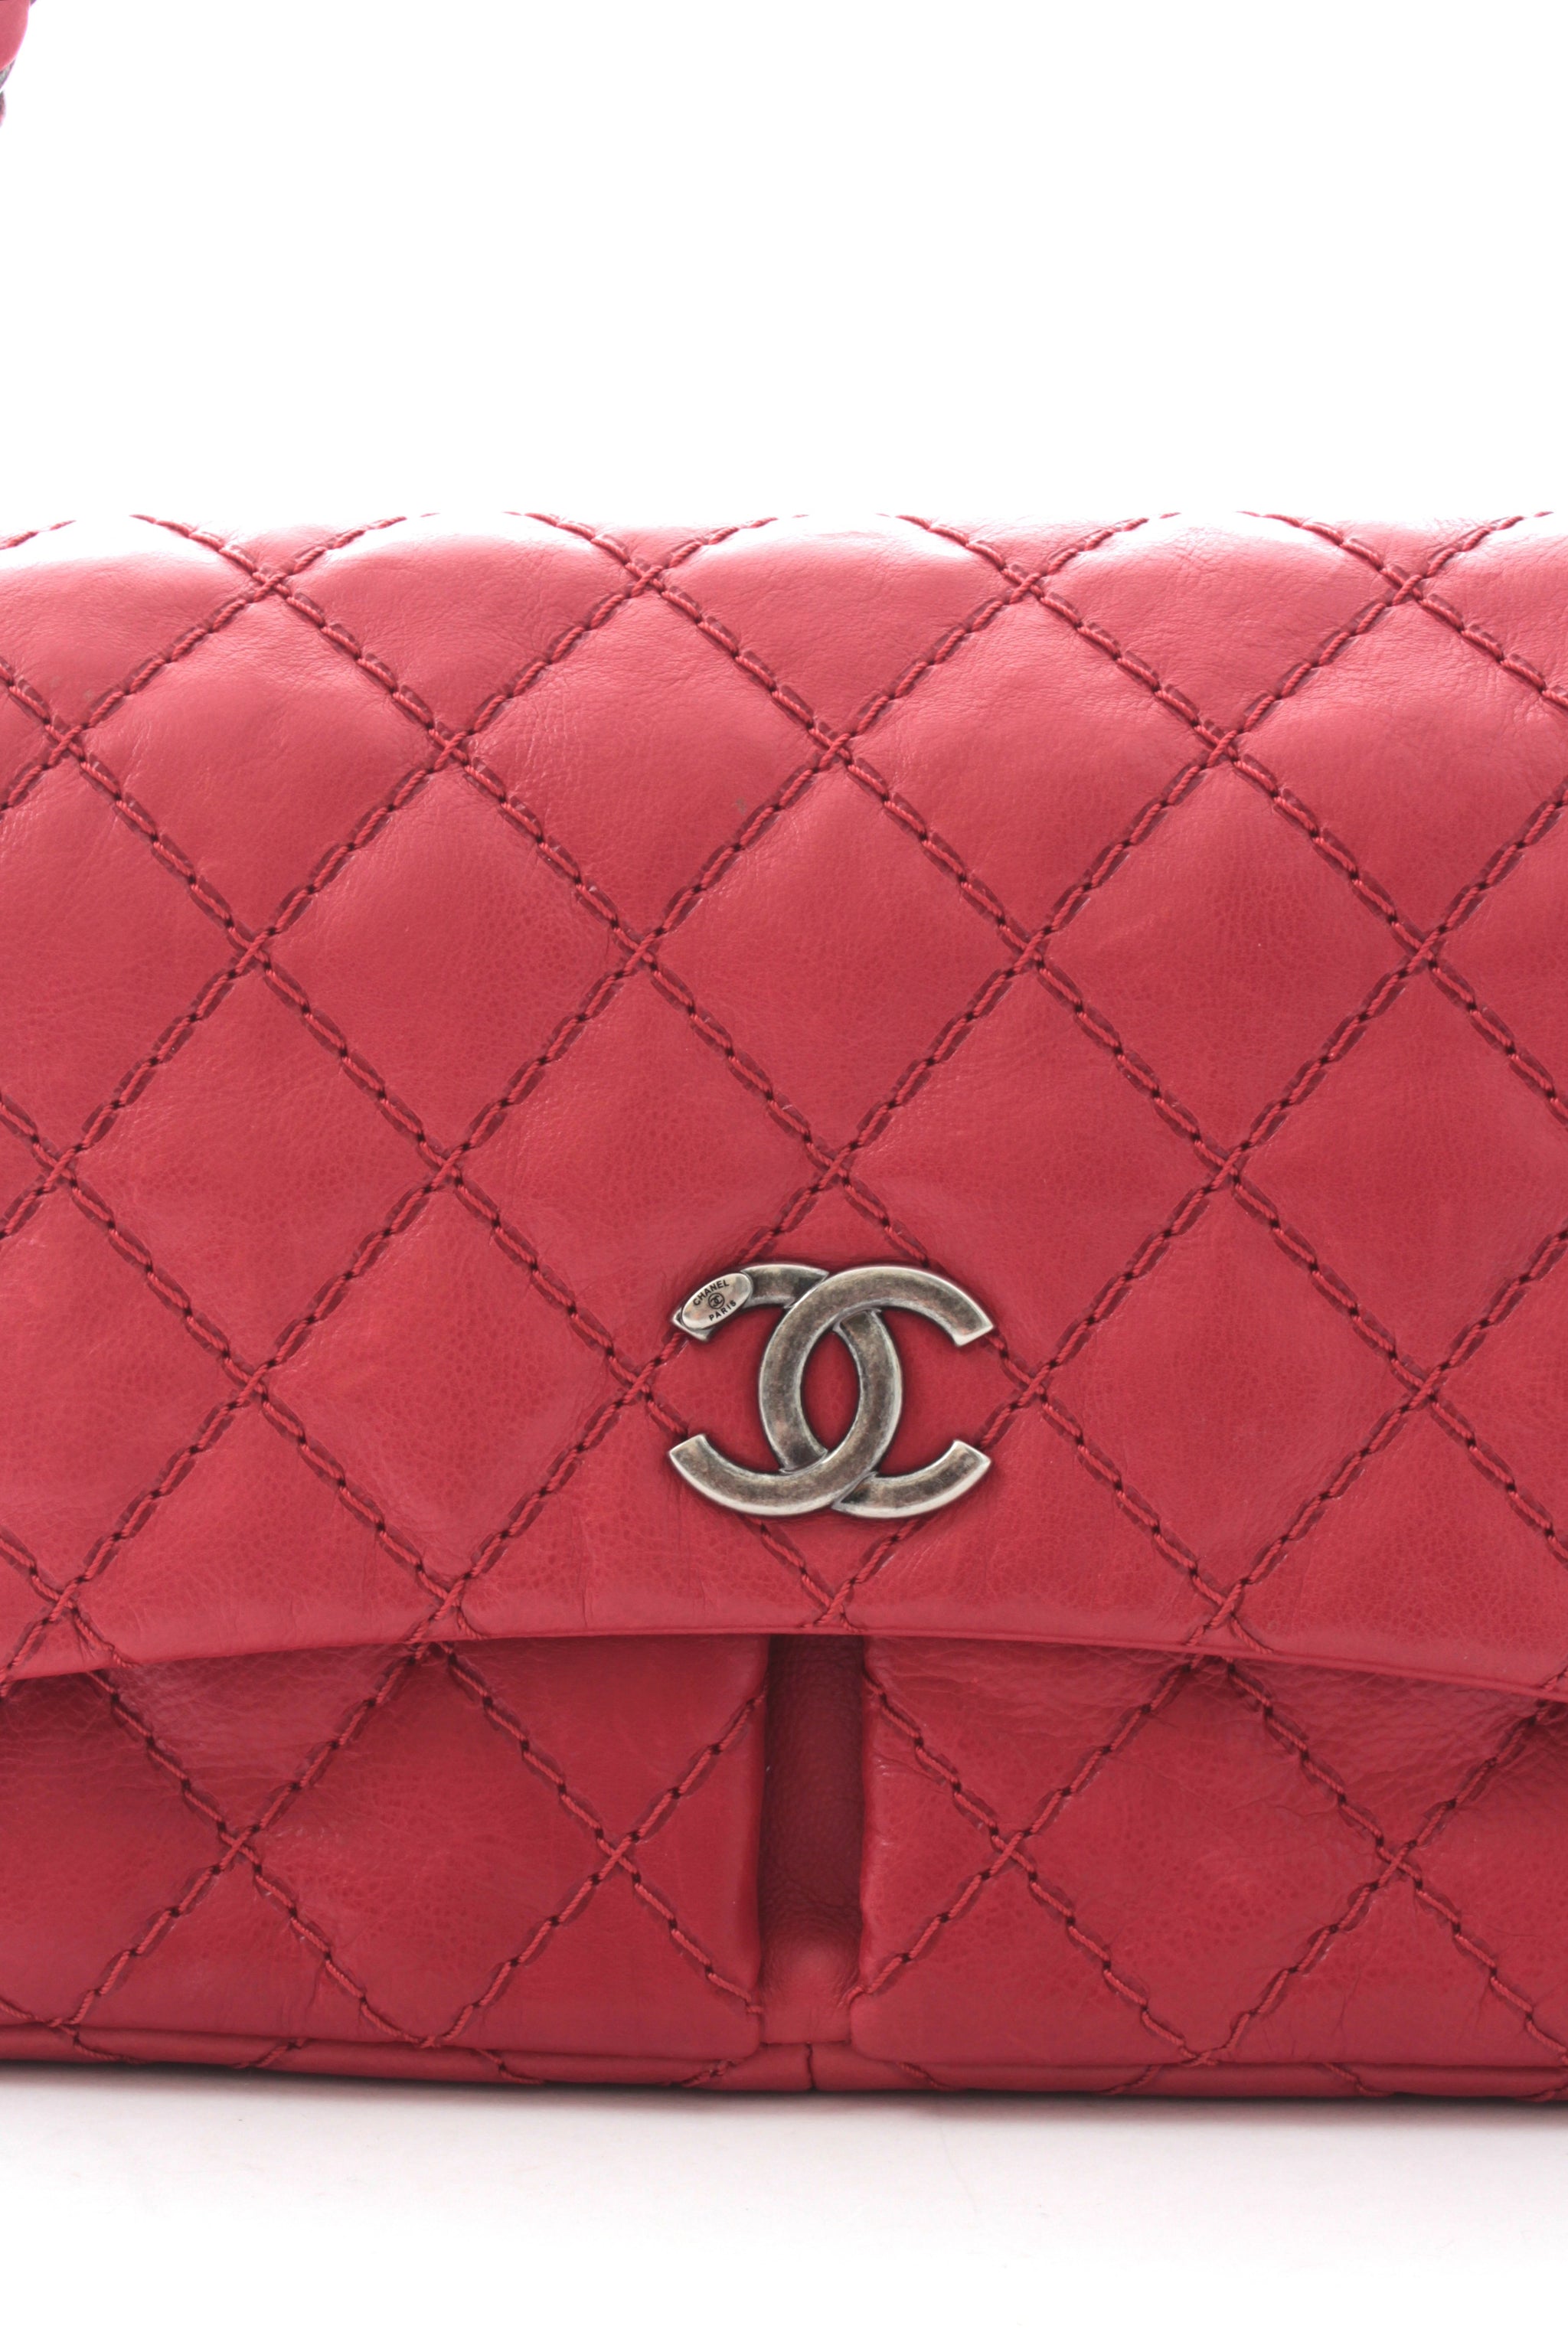 Chanel Red Quilted Leather Large Ultimate Stitch Flap Bag Chanel